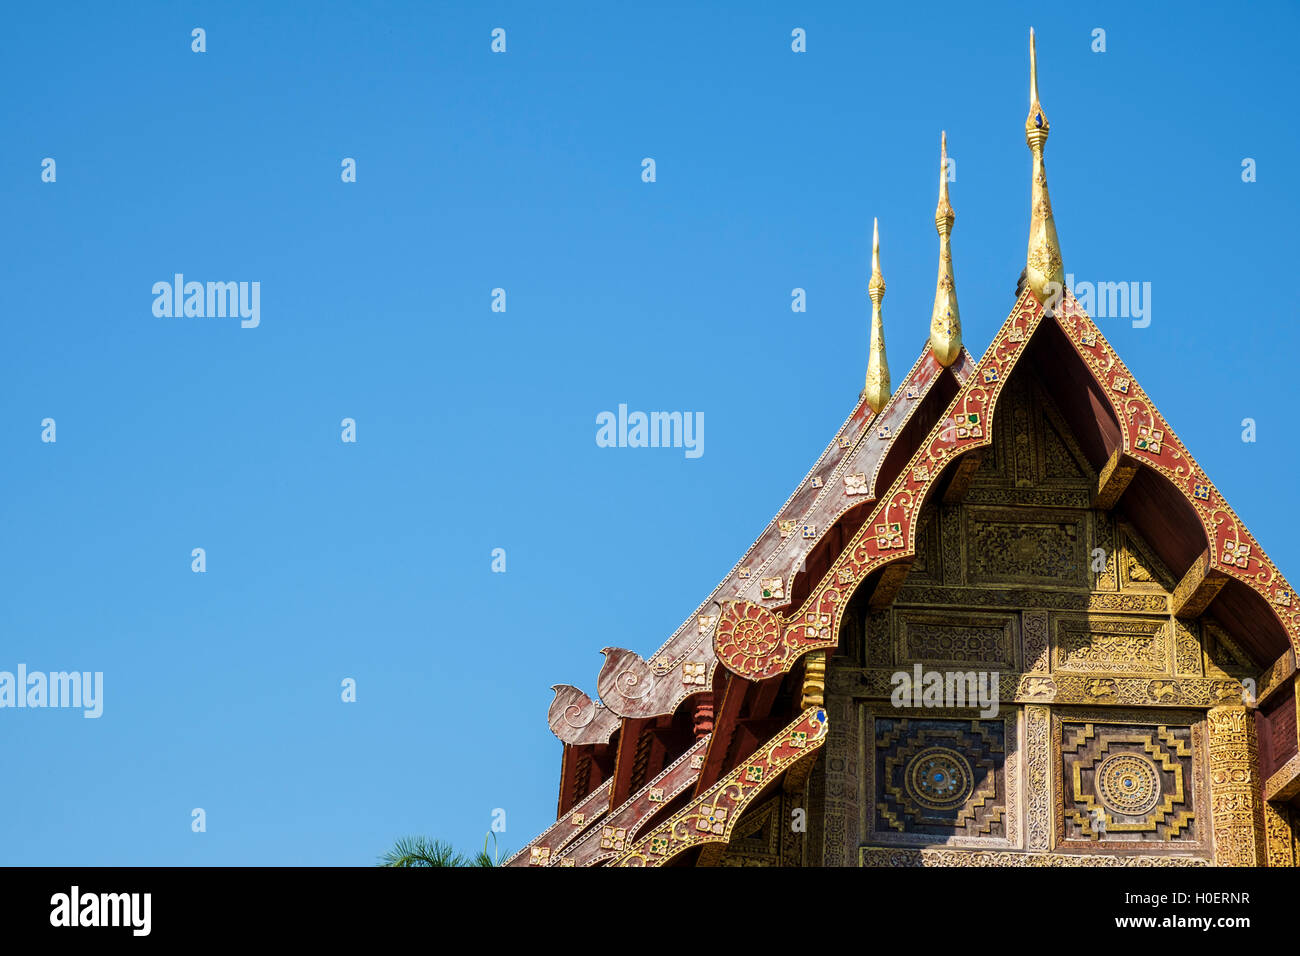 Lanna-style three-tier roof with chofa and carved wood pediment of Wat Phra Sing, Chiang Mai, Chiang Mai Province, Thailand. Stock Photo